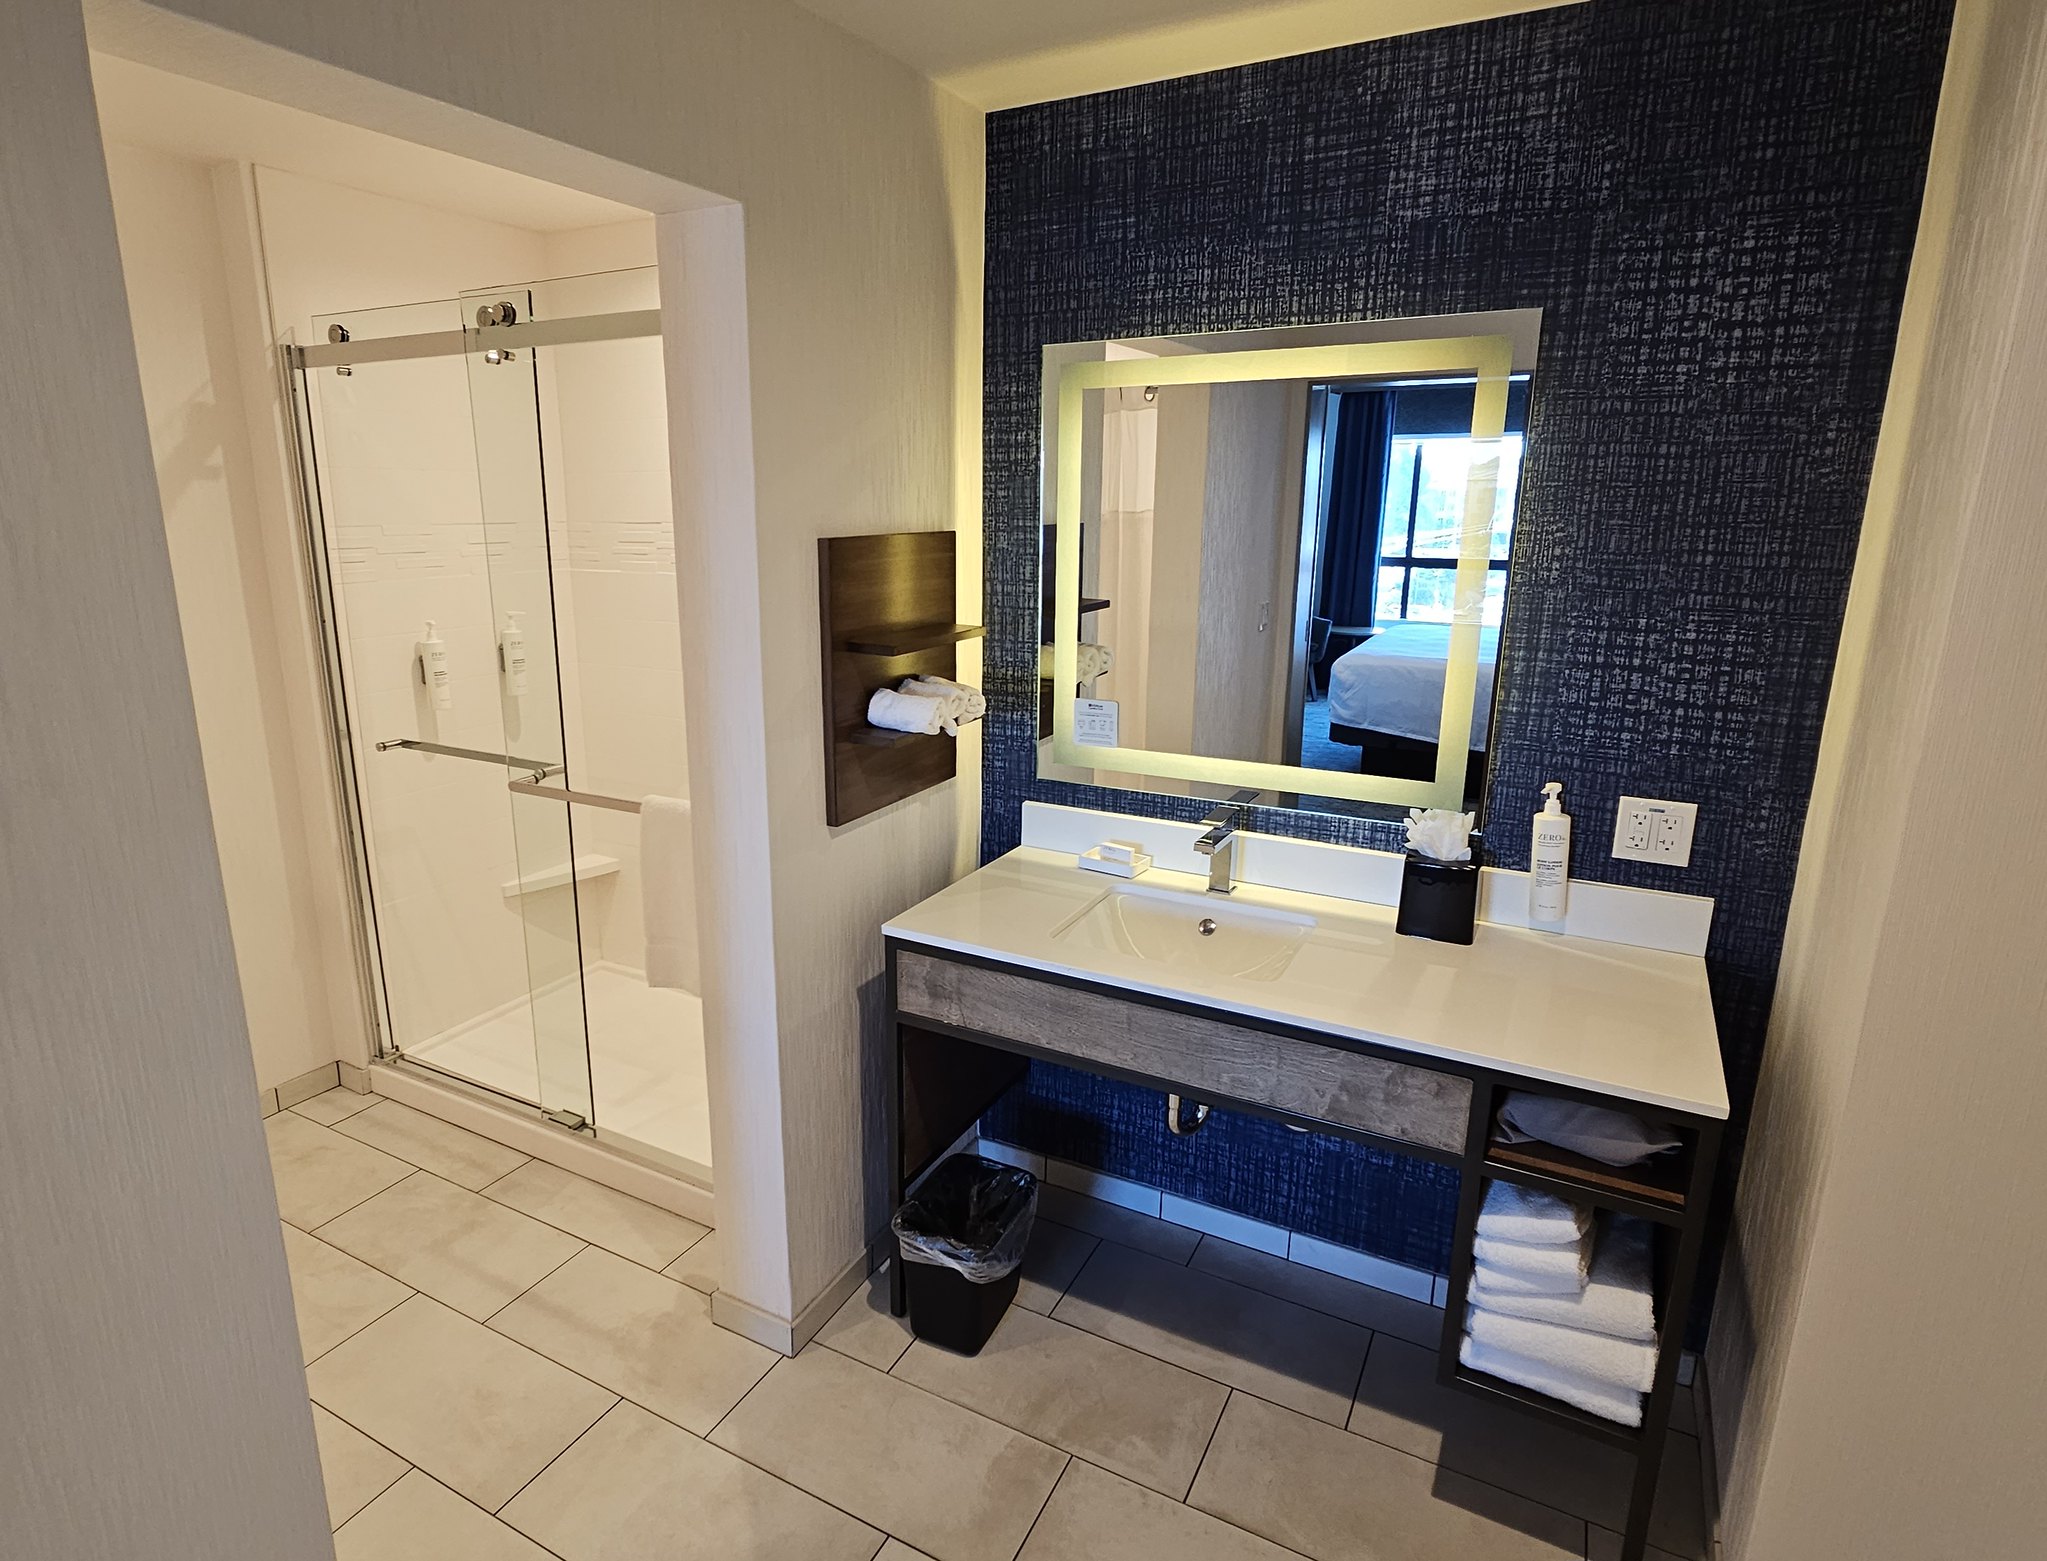 The bathroom in my suite at the Hilton Garden Inn, San Jose Airport